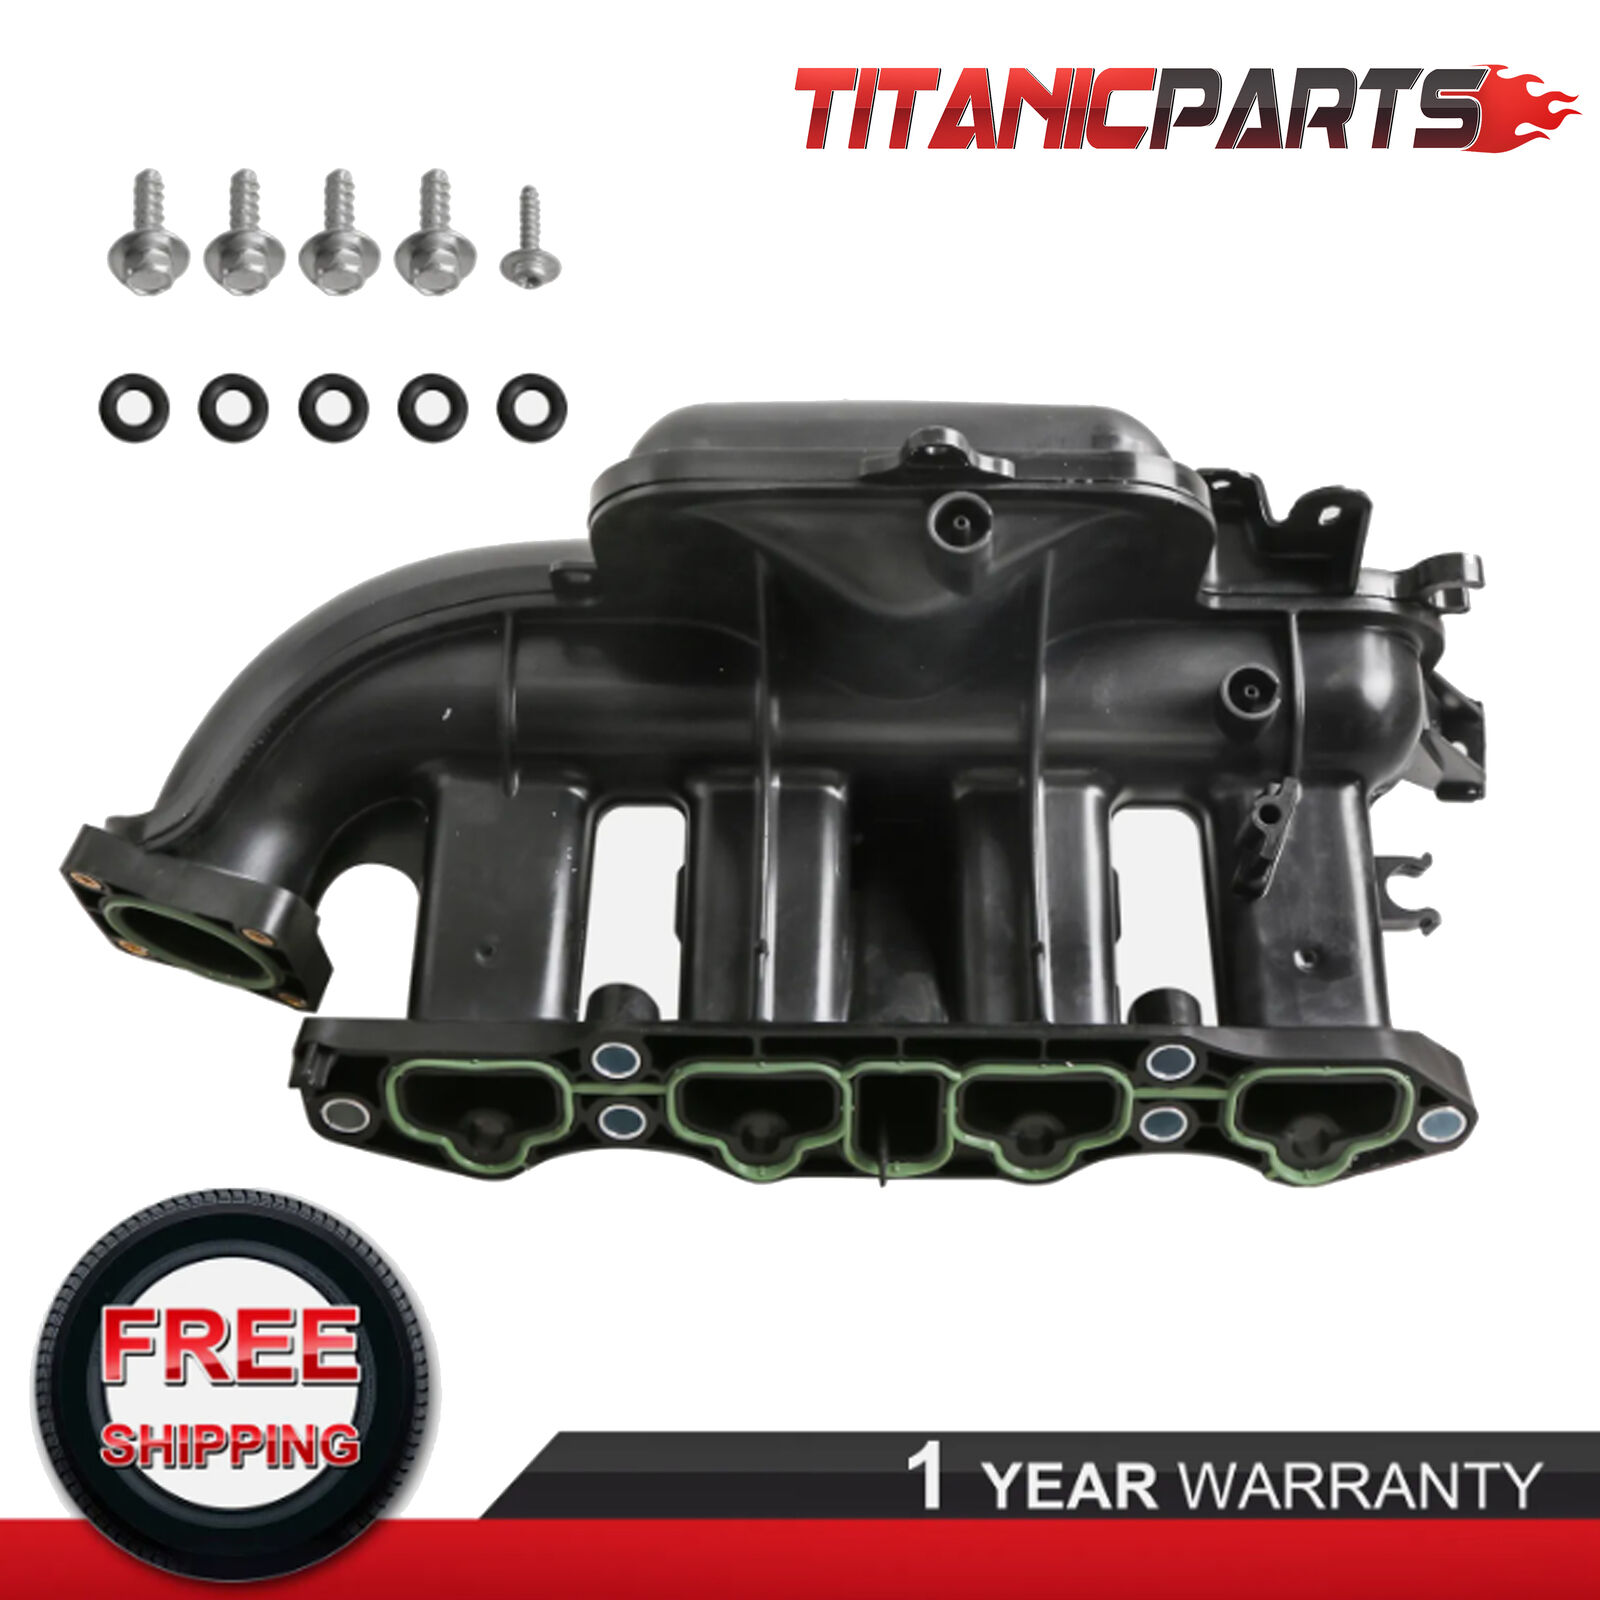 Engine Intake Manifold +Bolts For Buick Encore Chevy Cruze Trax LS 1.4L 615-380